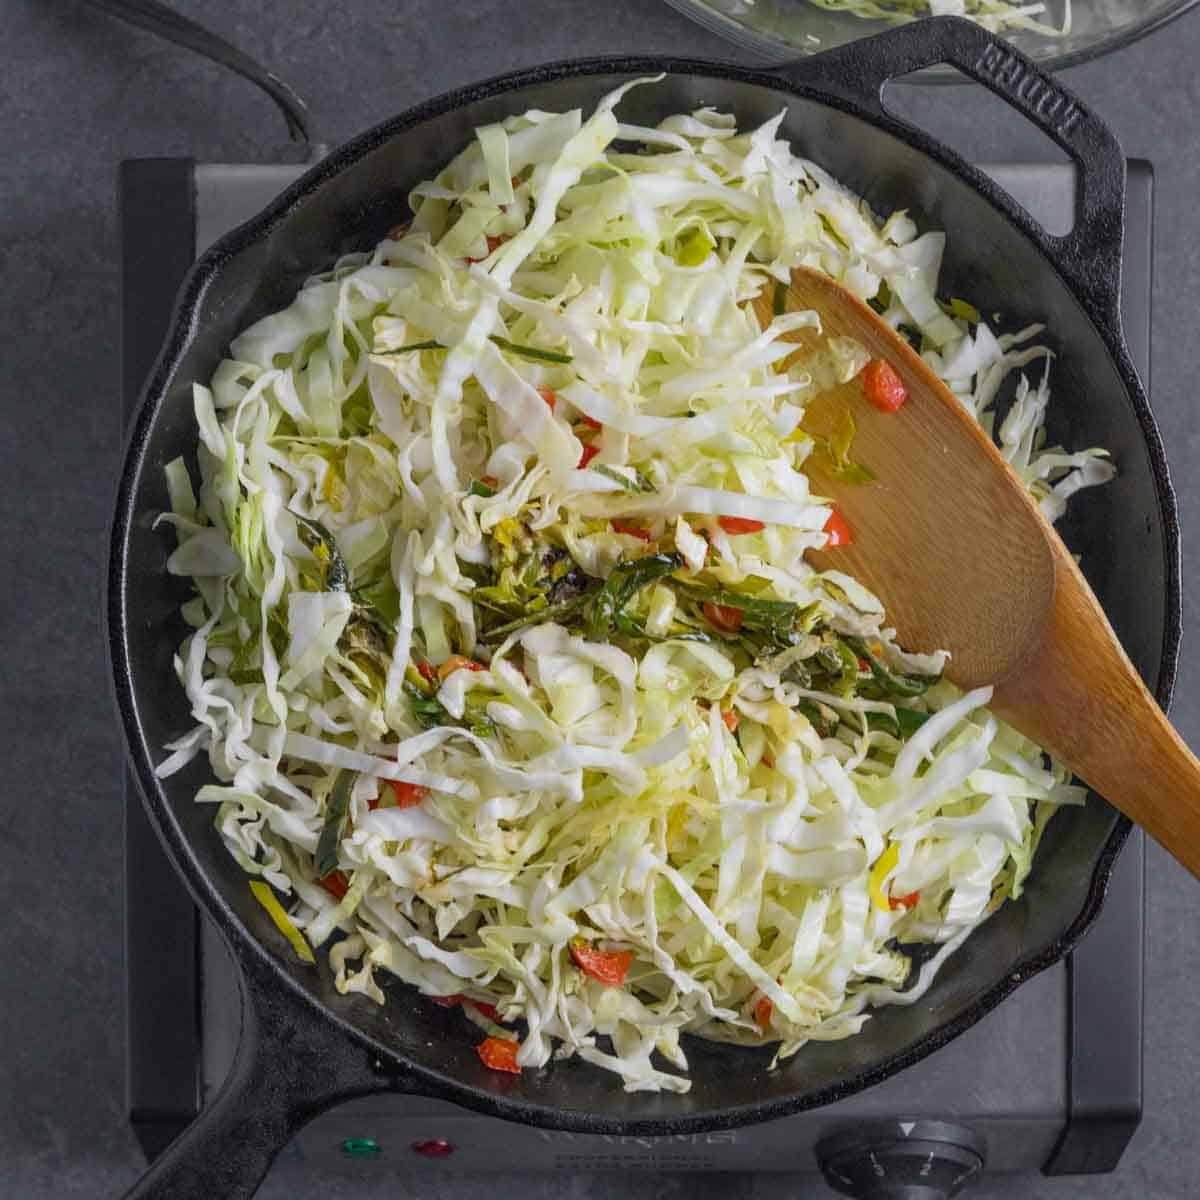 Remaining cabbage in skillet with vegetables and spices on simmer.